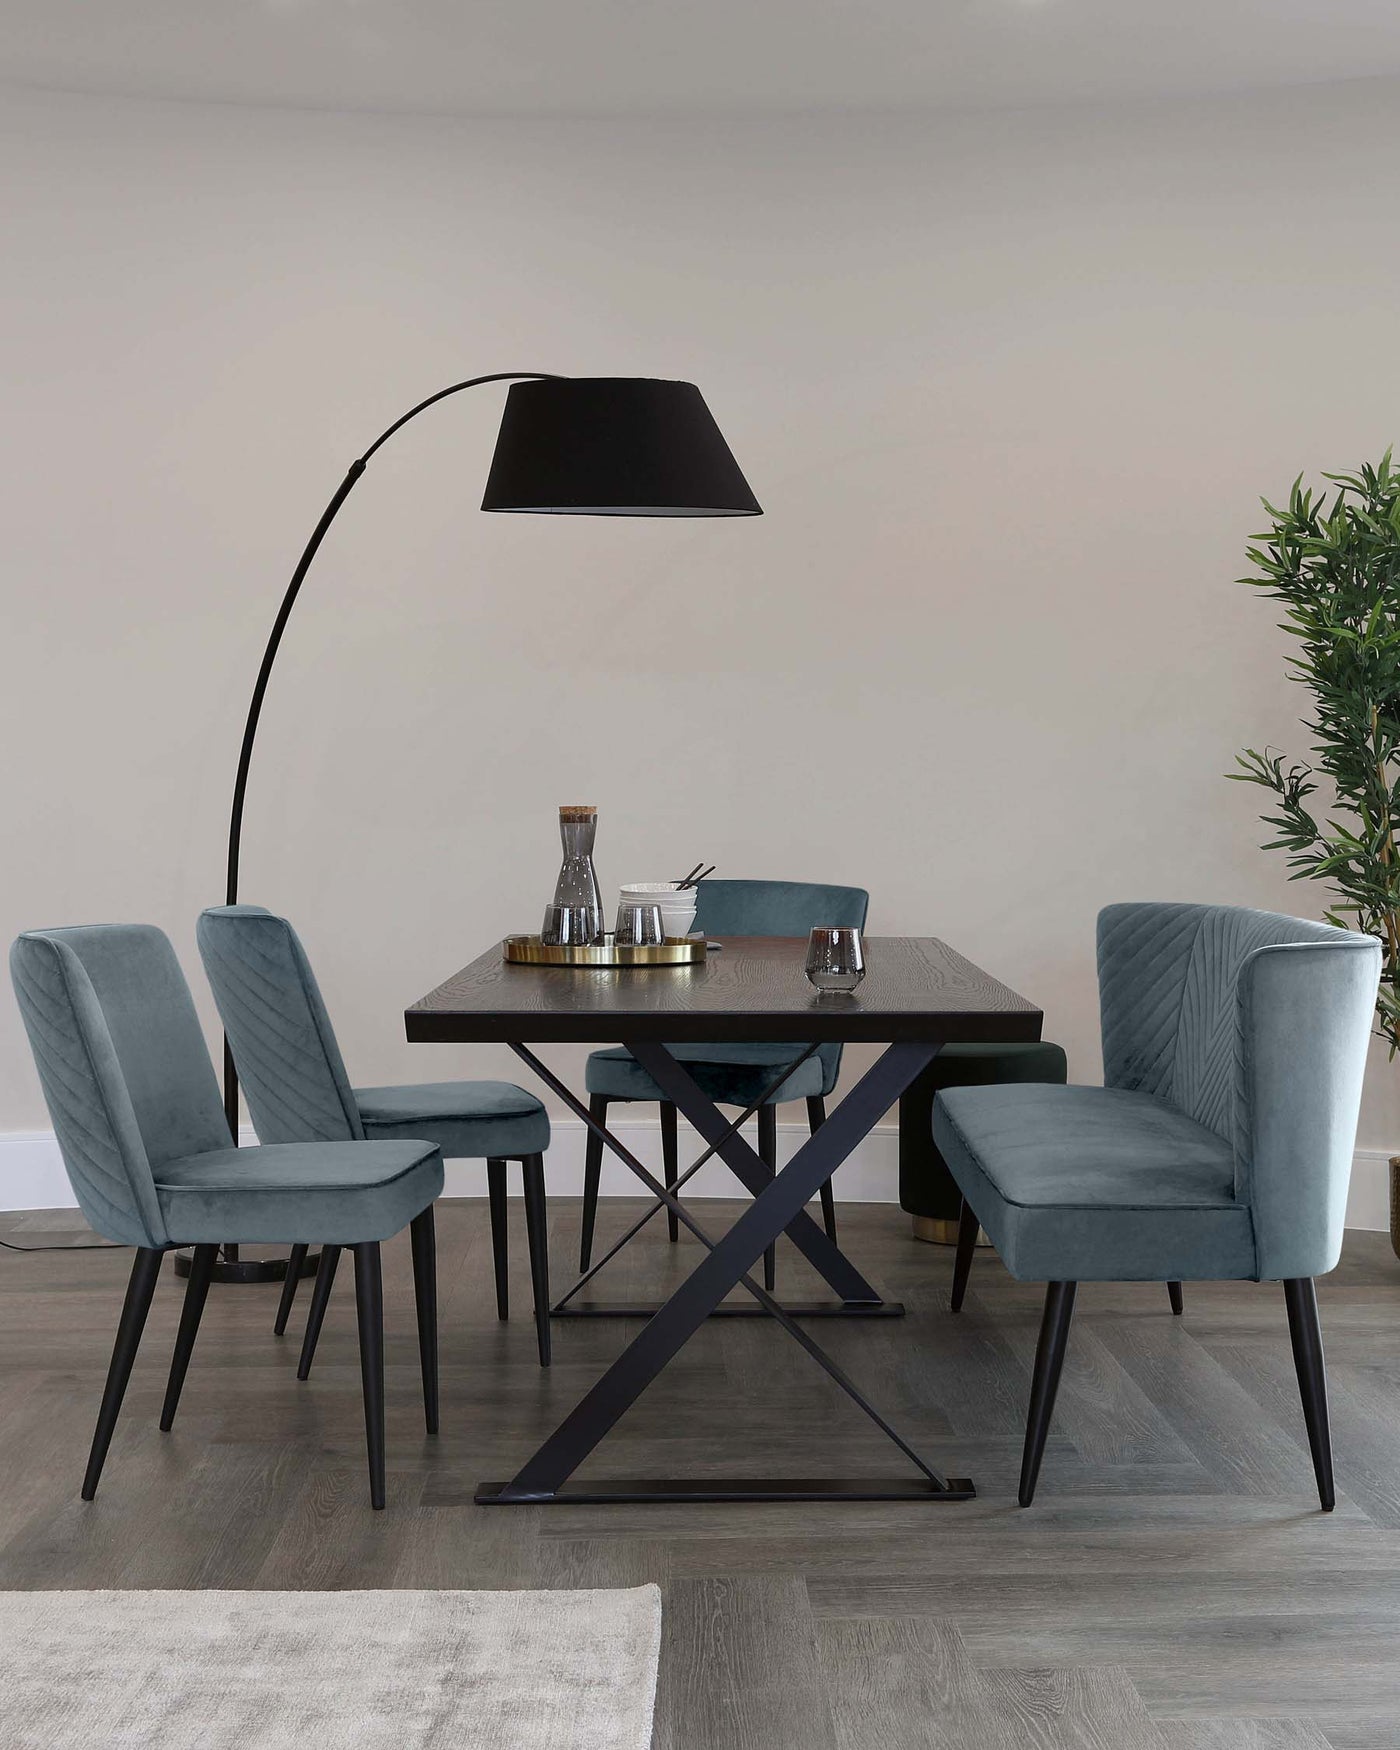 Modern dining set featuring a rectangular dark wood table with an X-shaped metal base and four plush velvet upholstered chairs in a soft blue colour, with channel tufting and black metal legs, complemented by an overhanging floor lamp with a large black shade.